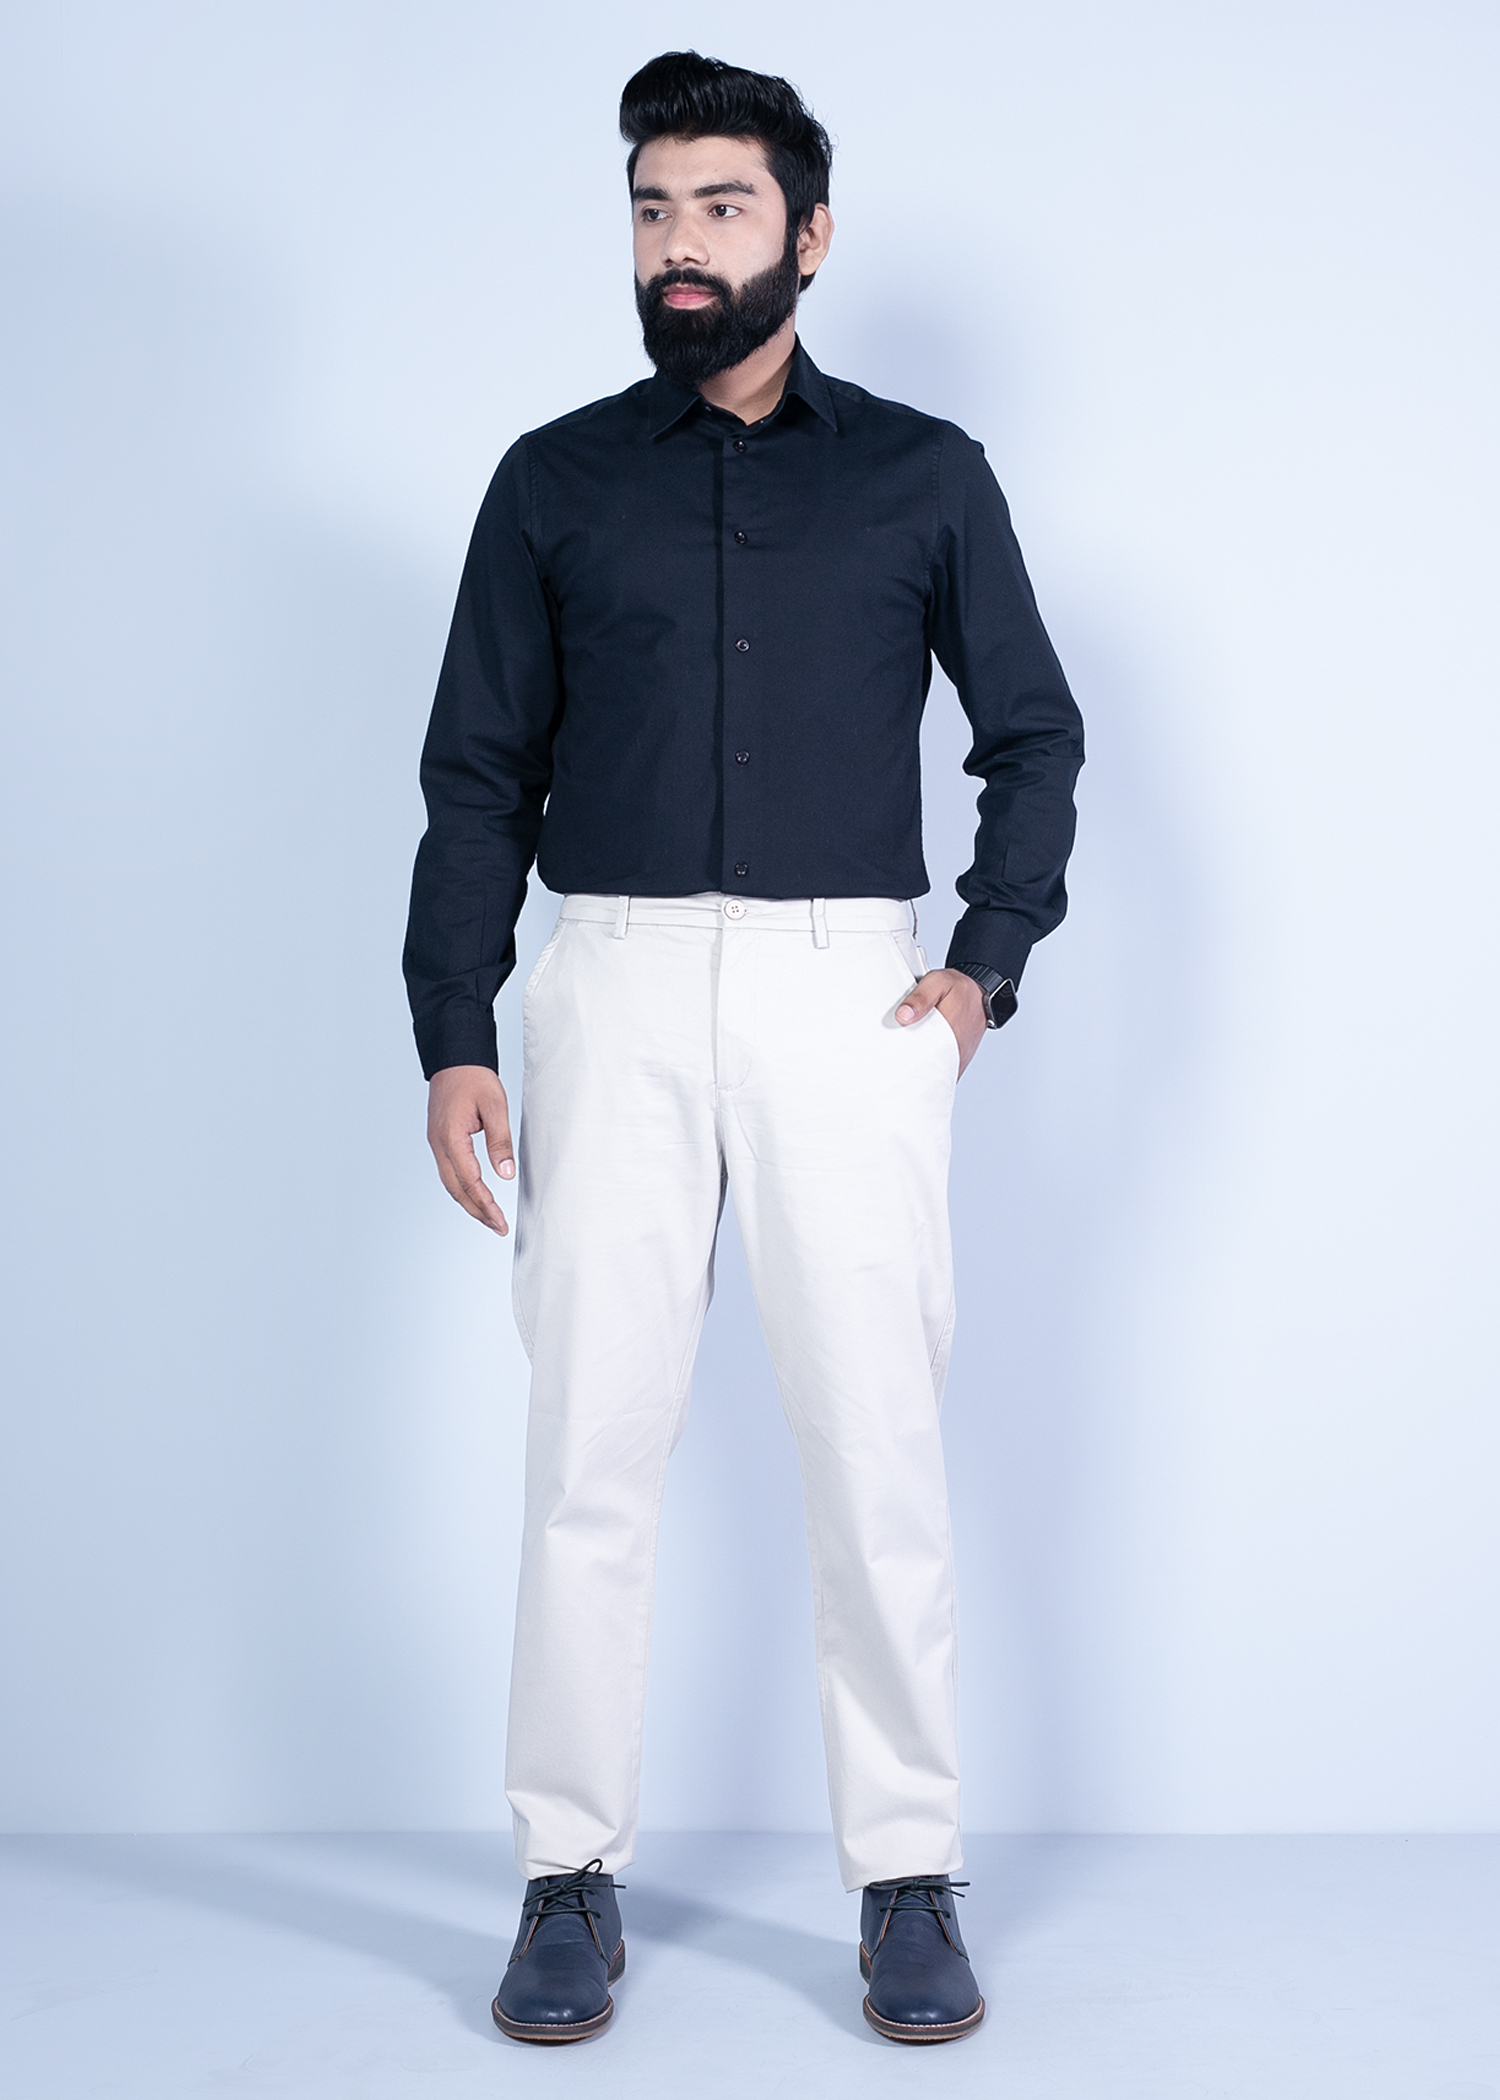 liqvan chino pant stone color full front view